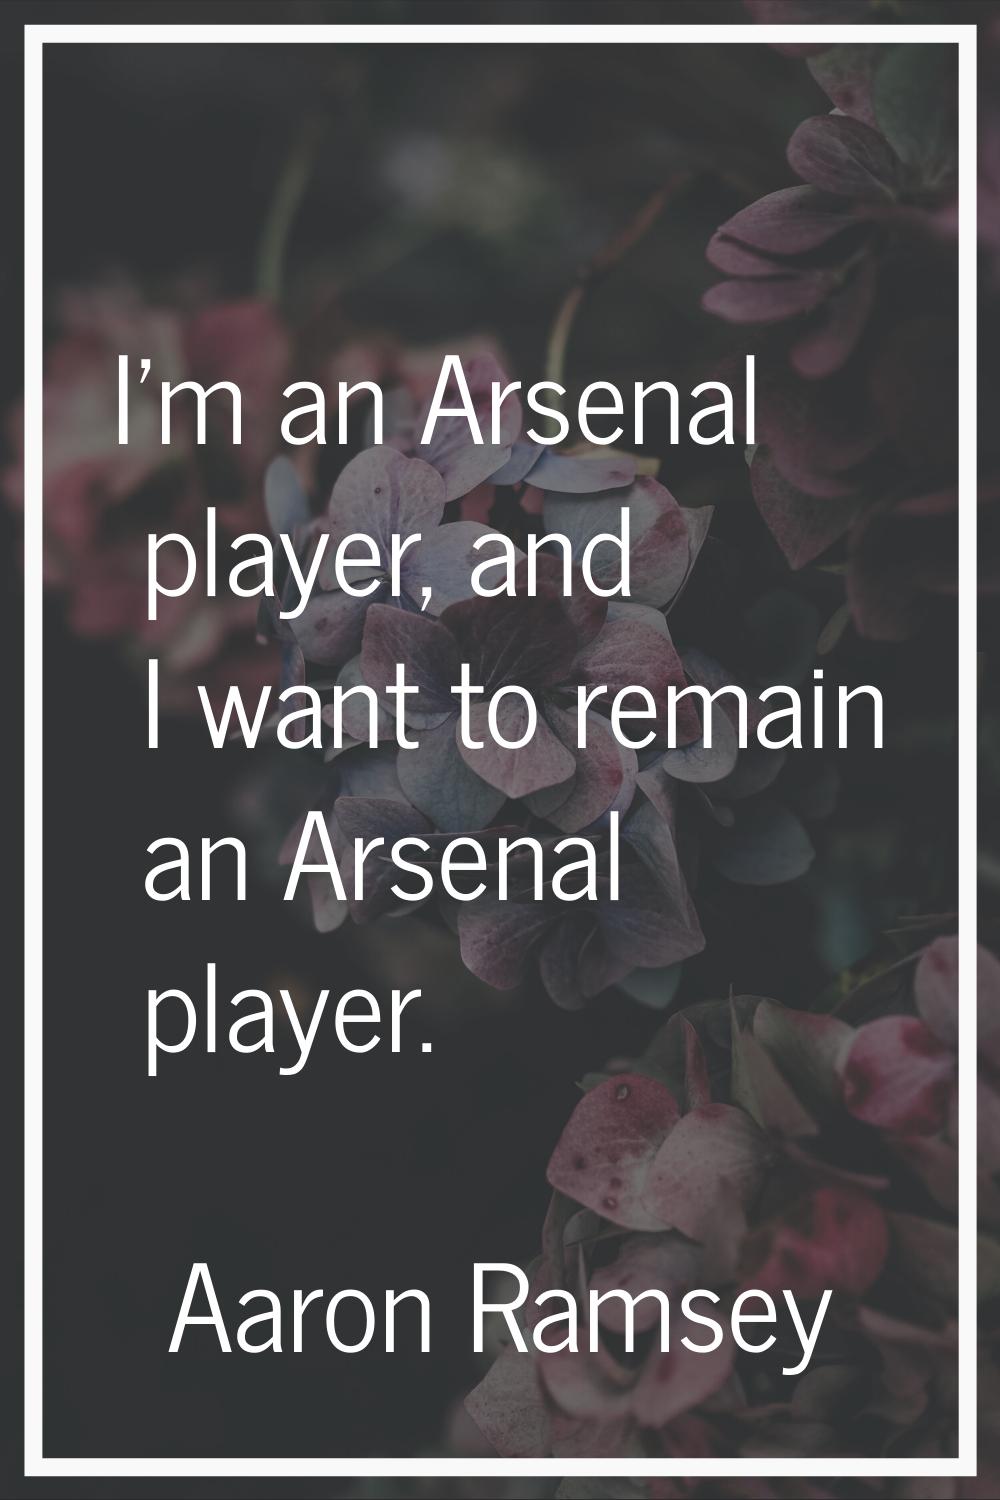 I'm an Arsenal player, and I want to remain an Arsenal player.